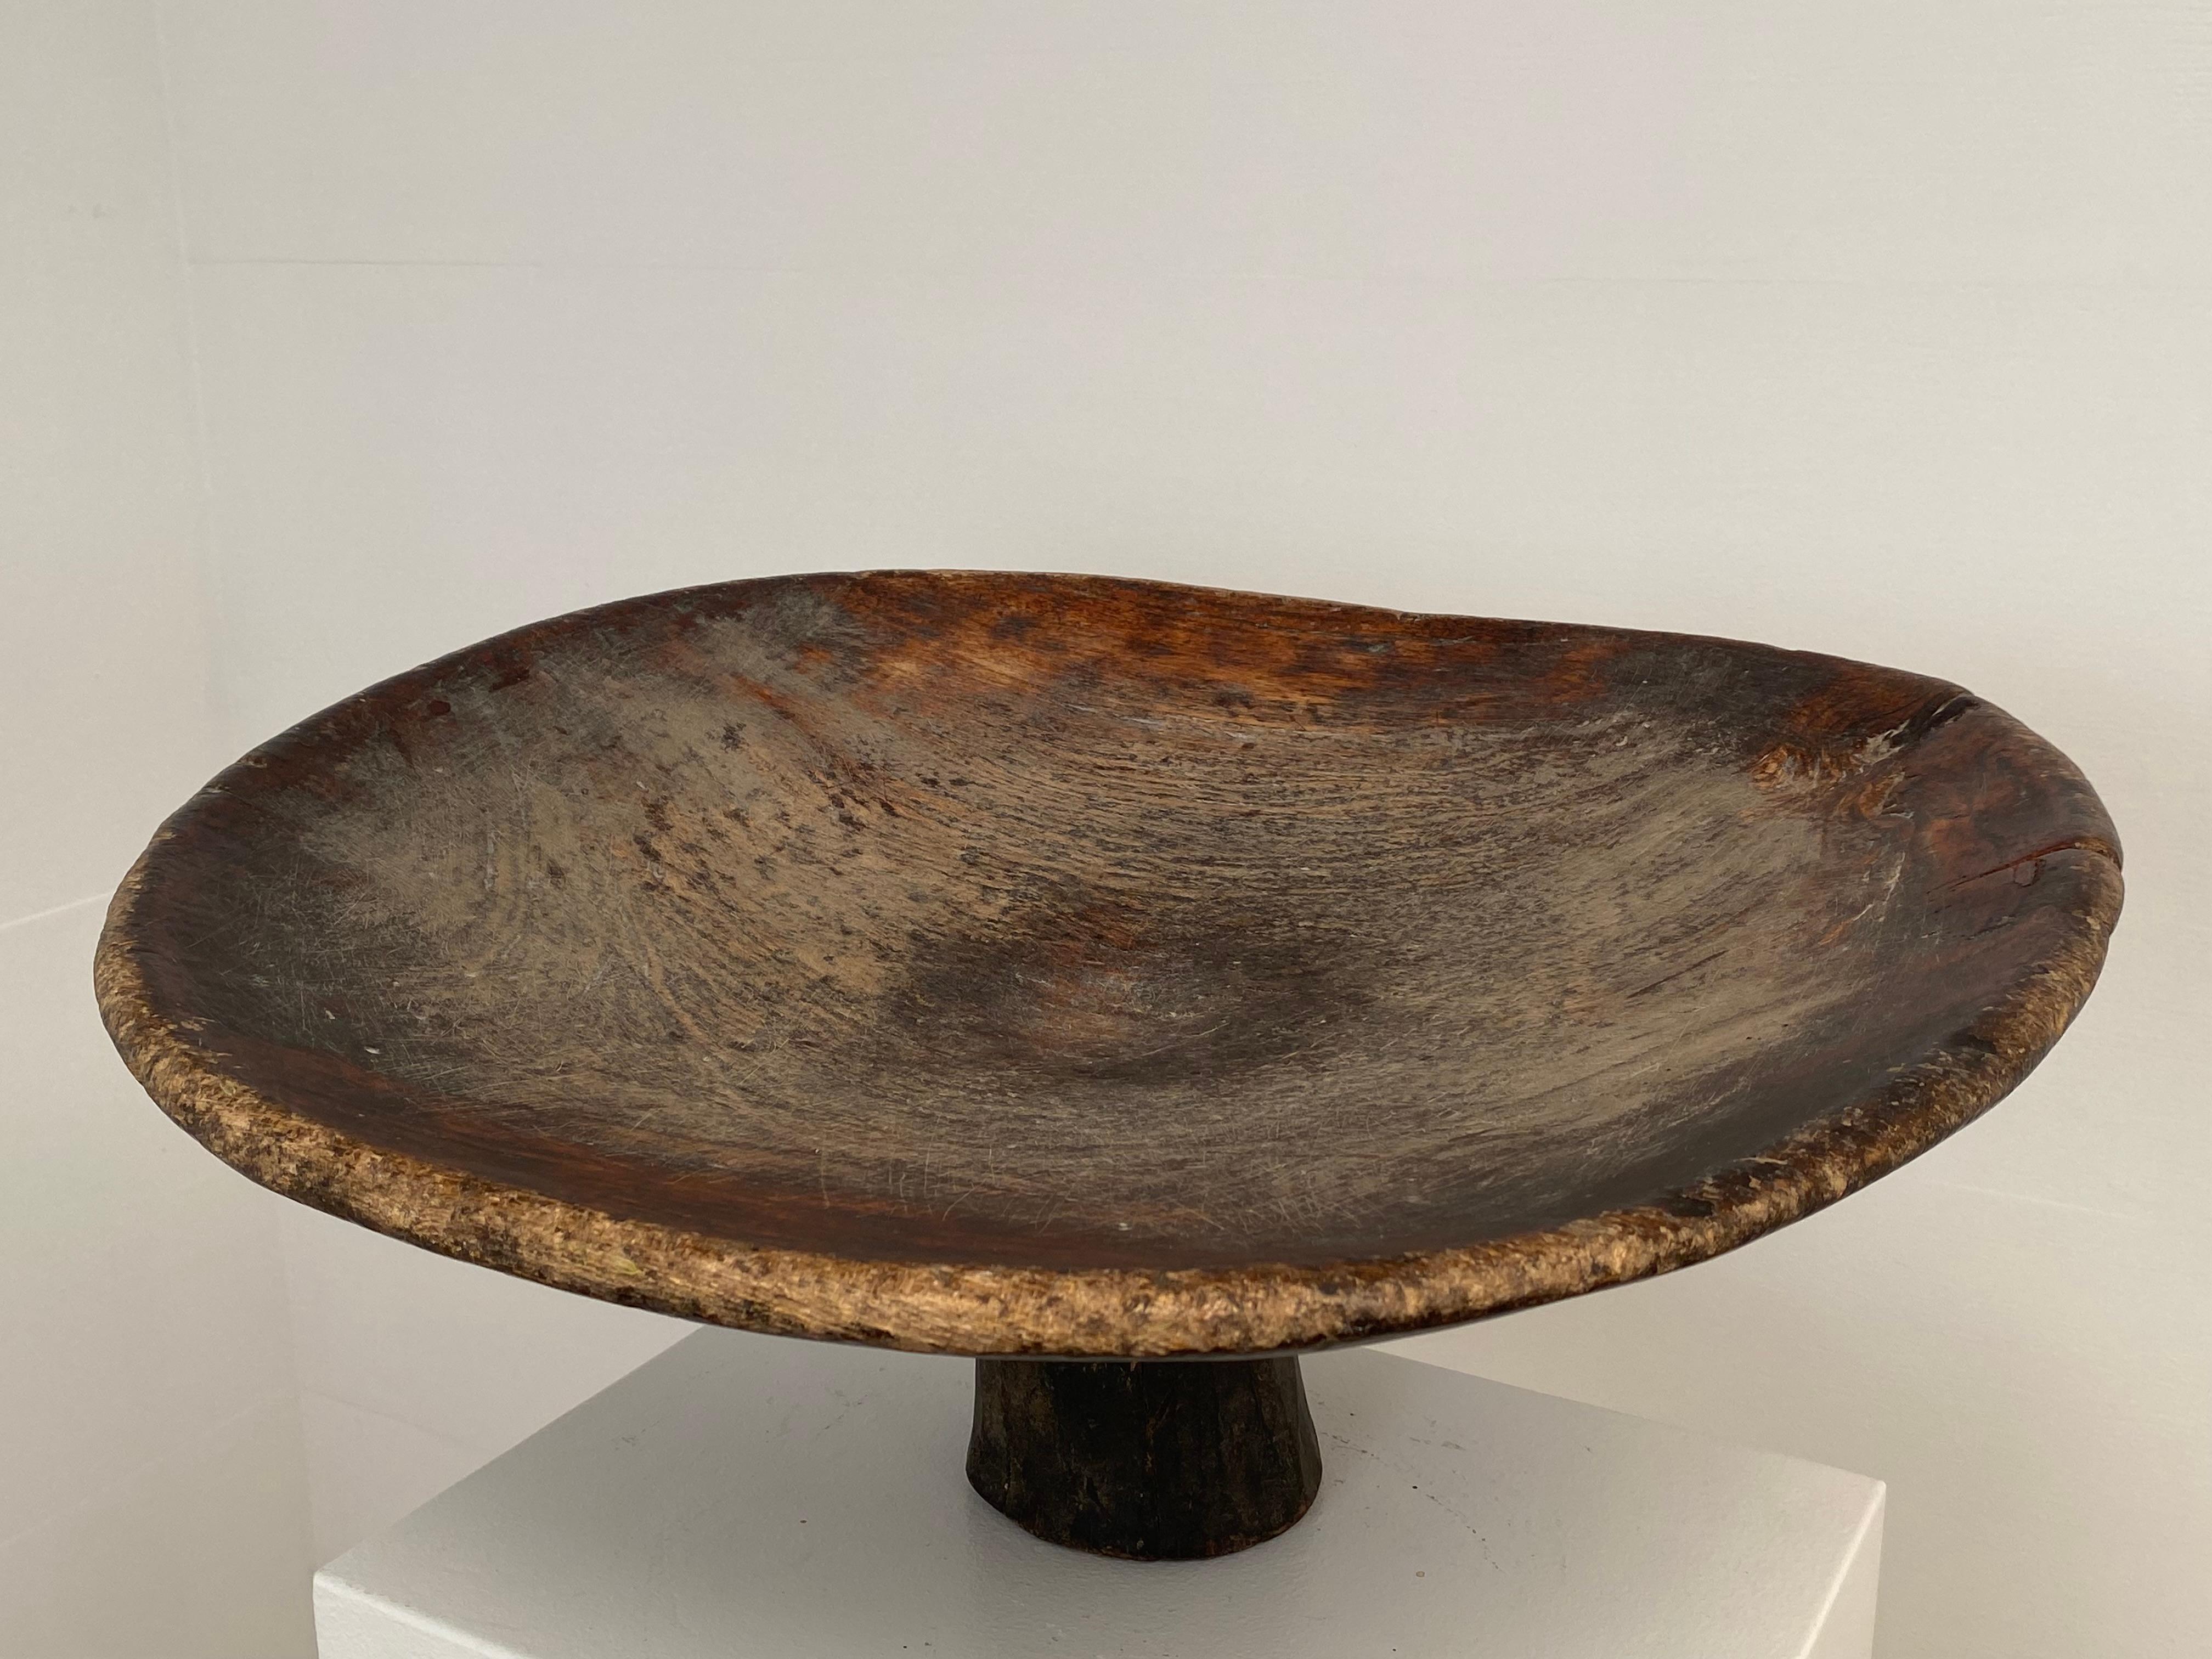 Antique, Brutalist Wooden Berber Tazza  In Excellent Condition For Sale In Schellebelle, BE